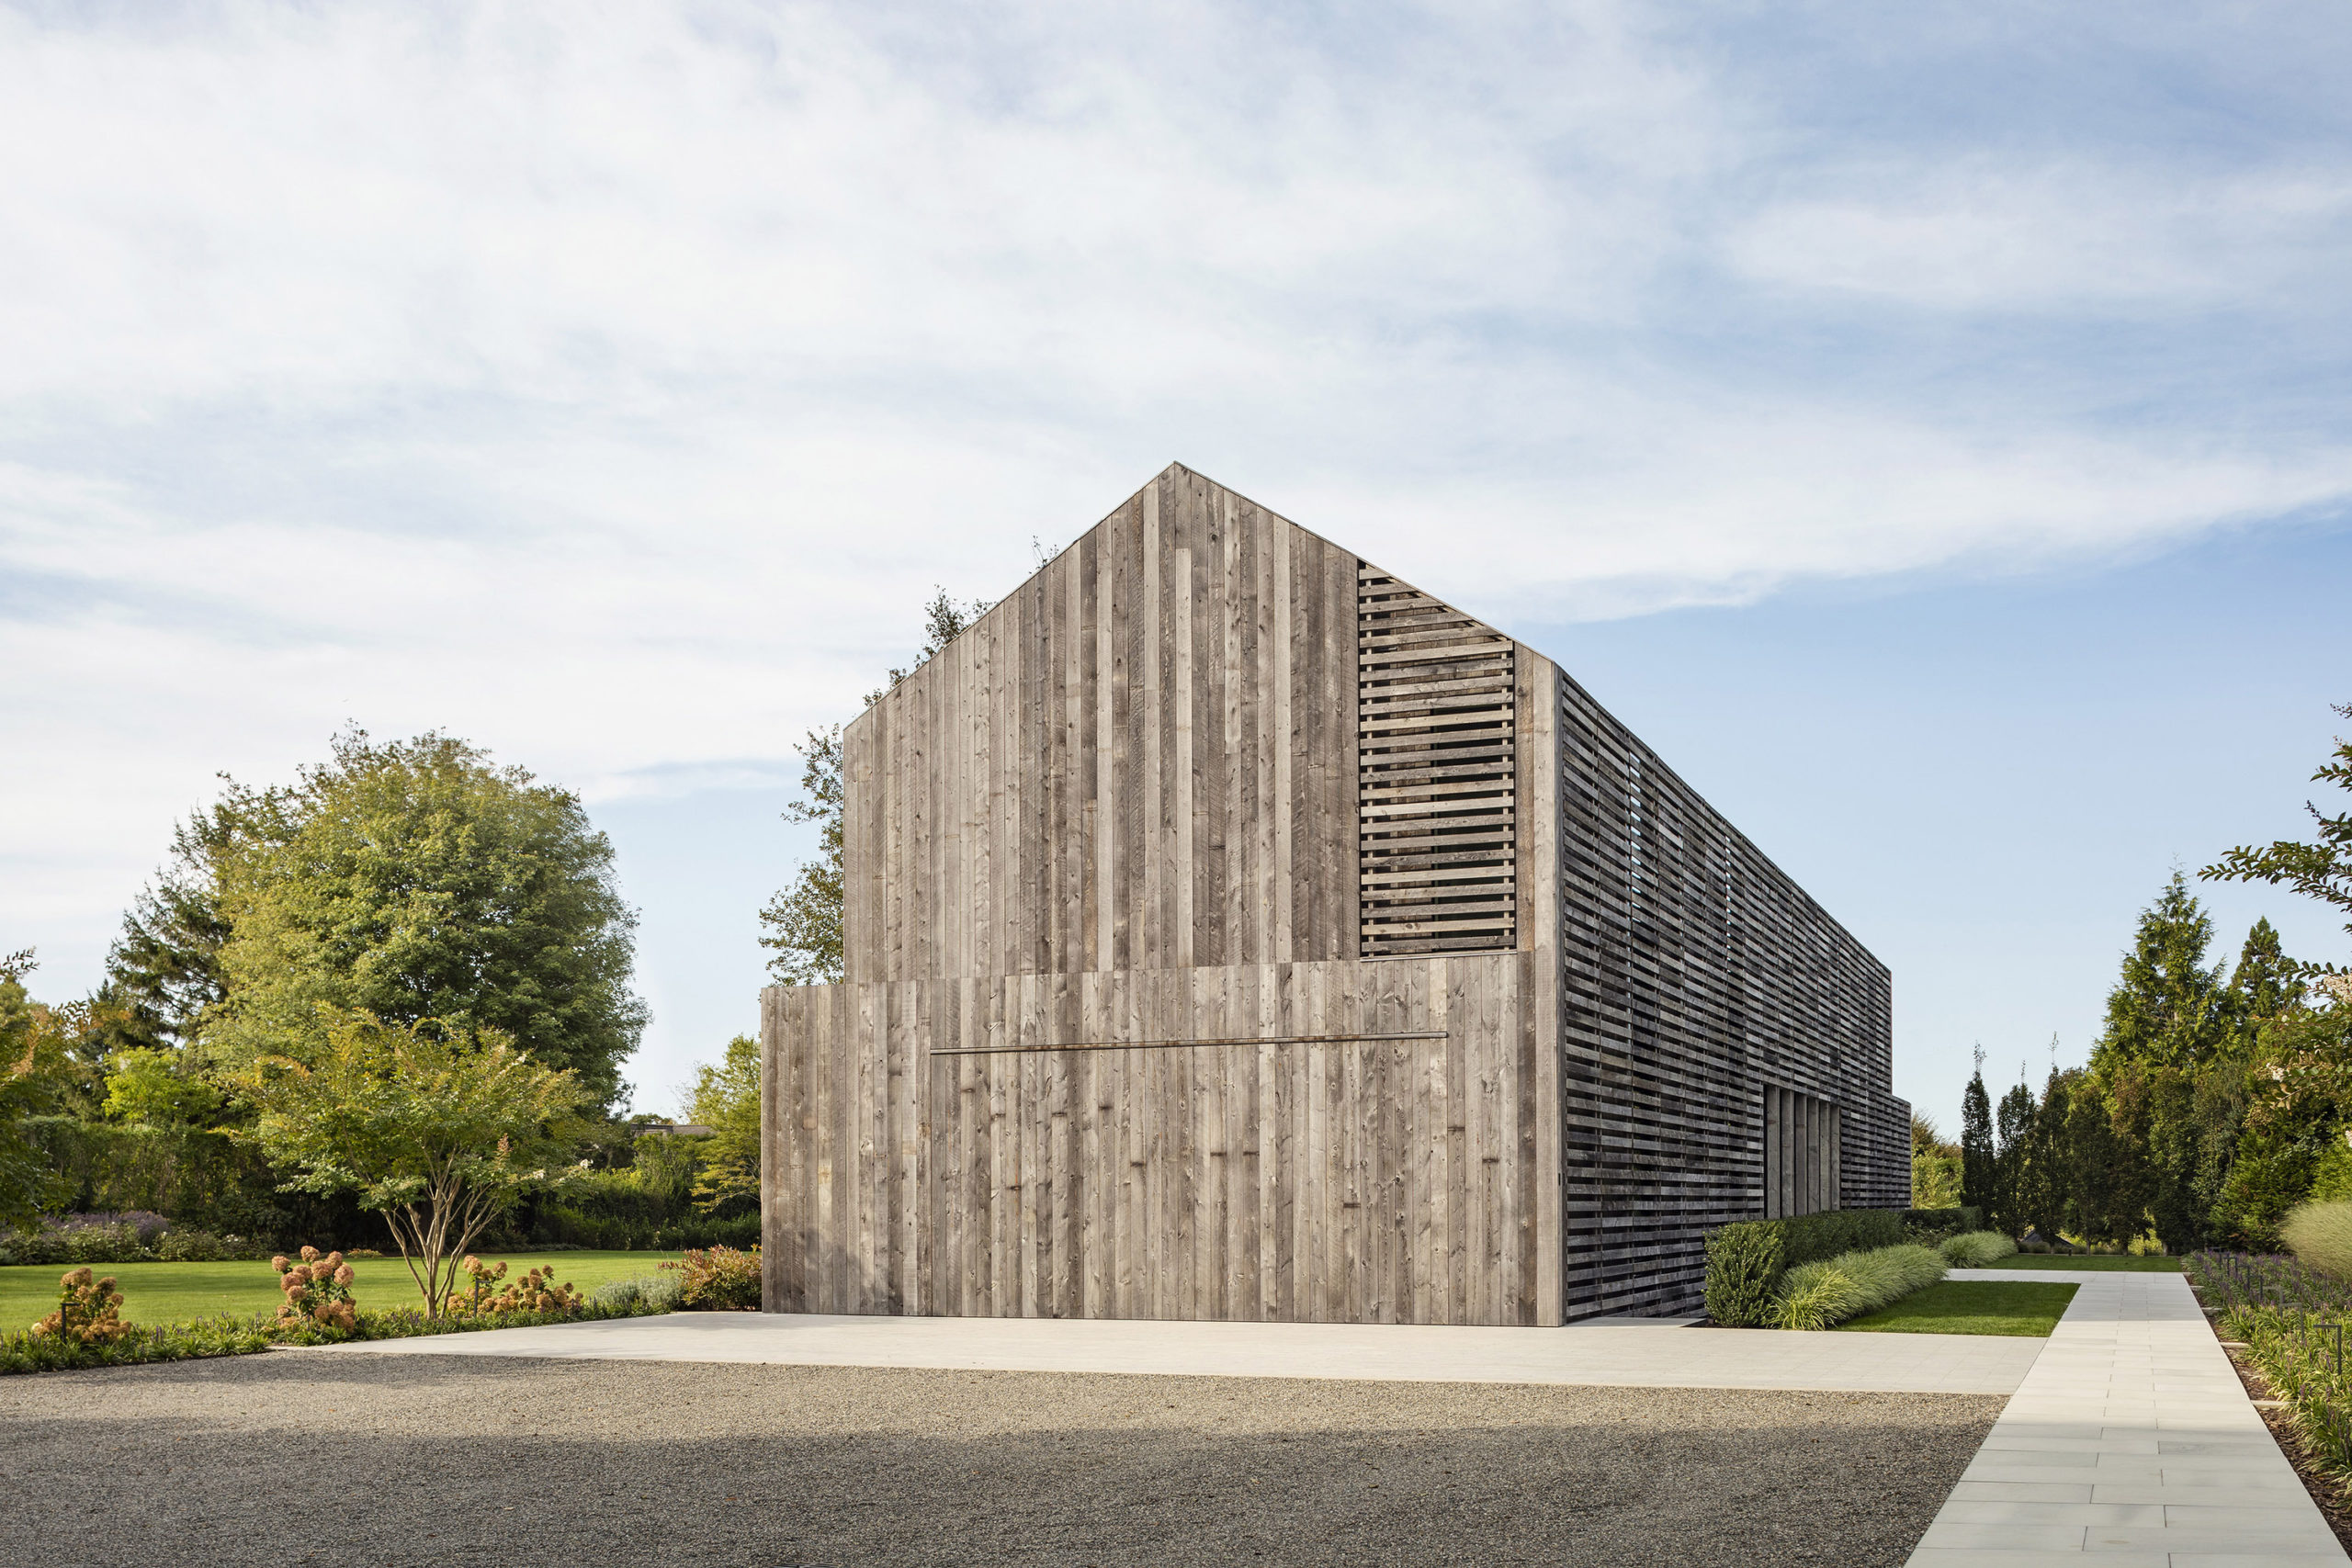 Lathhouse by Birdseye Architecture in Richmond Vermont earned an Honor Award from AIA Peconic.